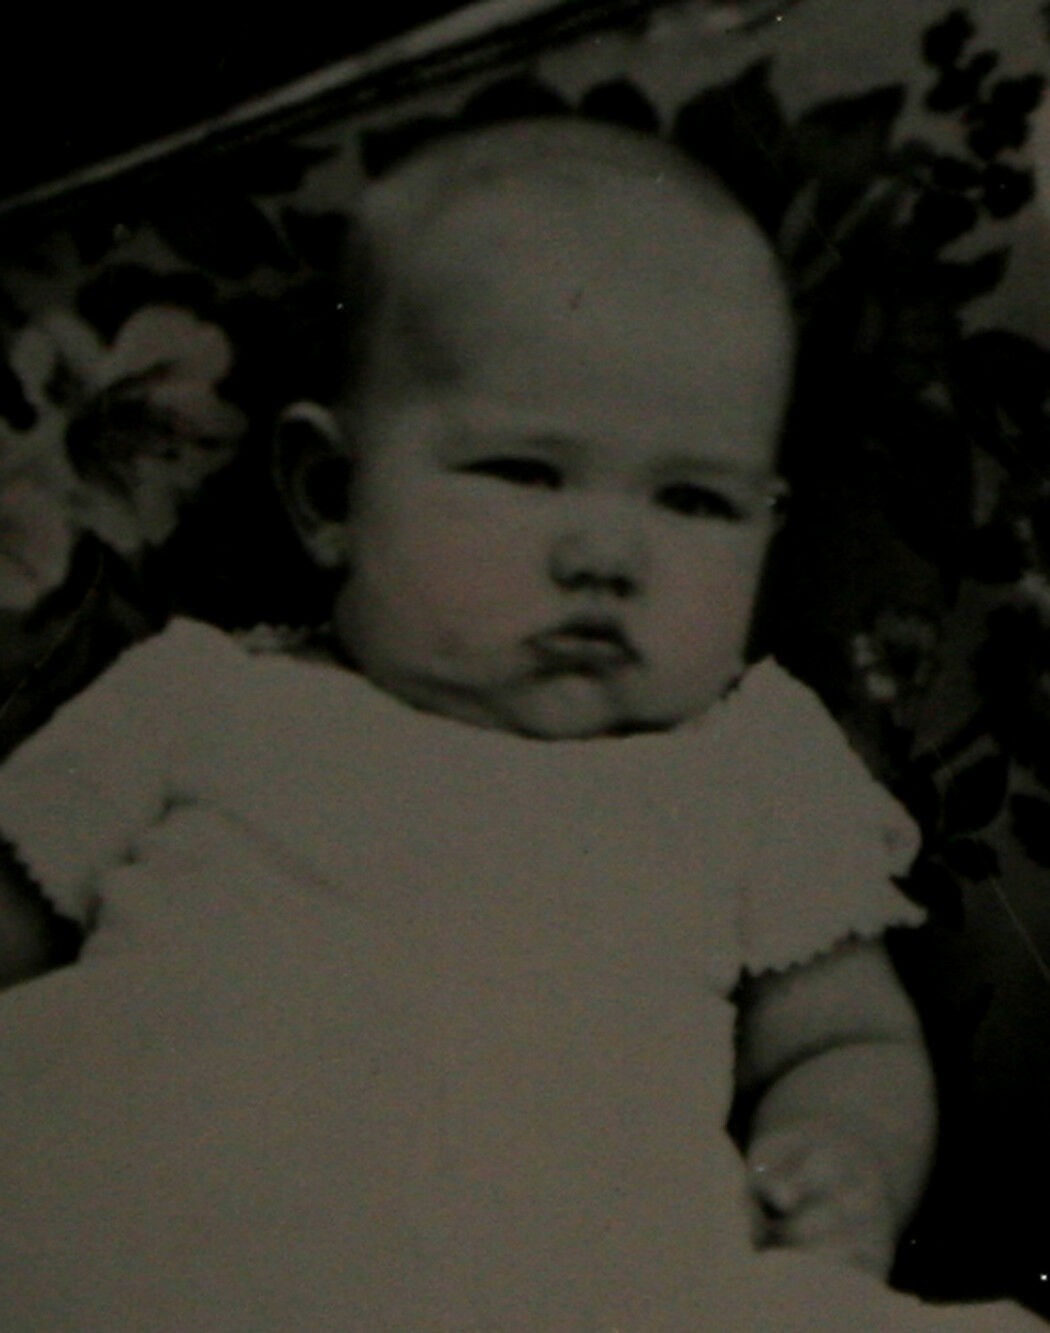 Chubby Cheeked Baby On Floral Print Couch. 6th Plate Ambrotype By Bowdoin.